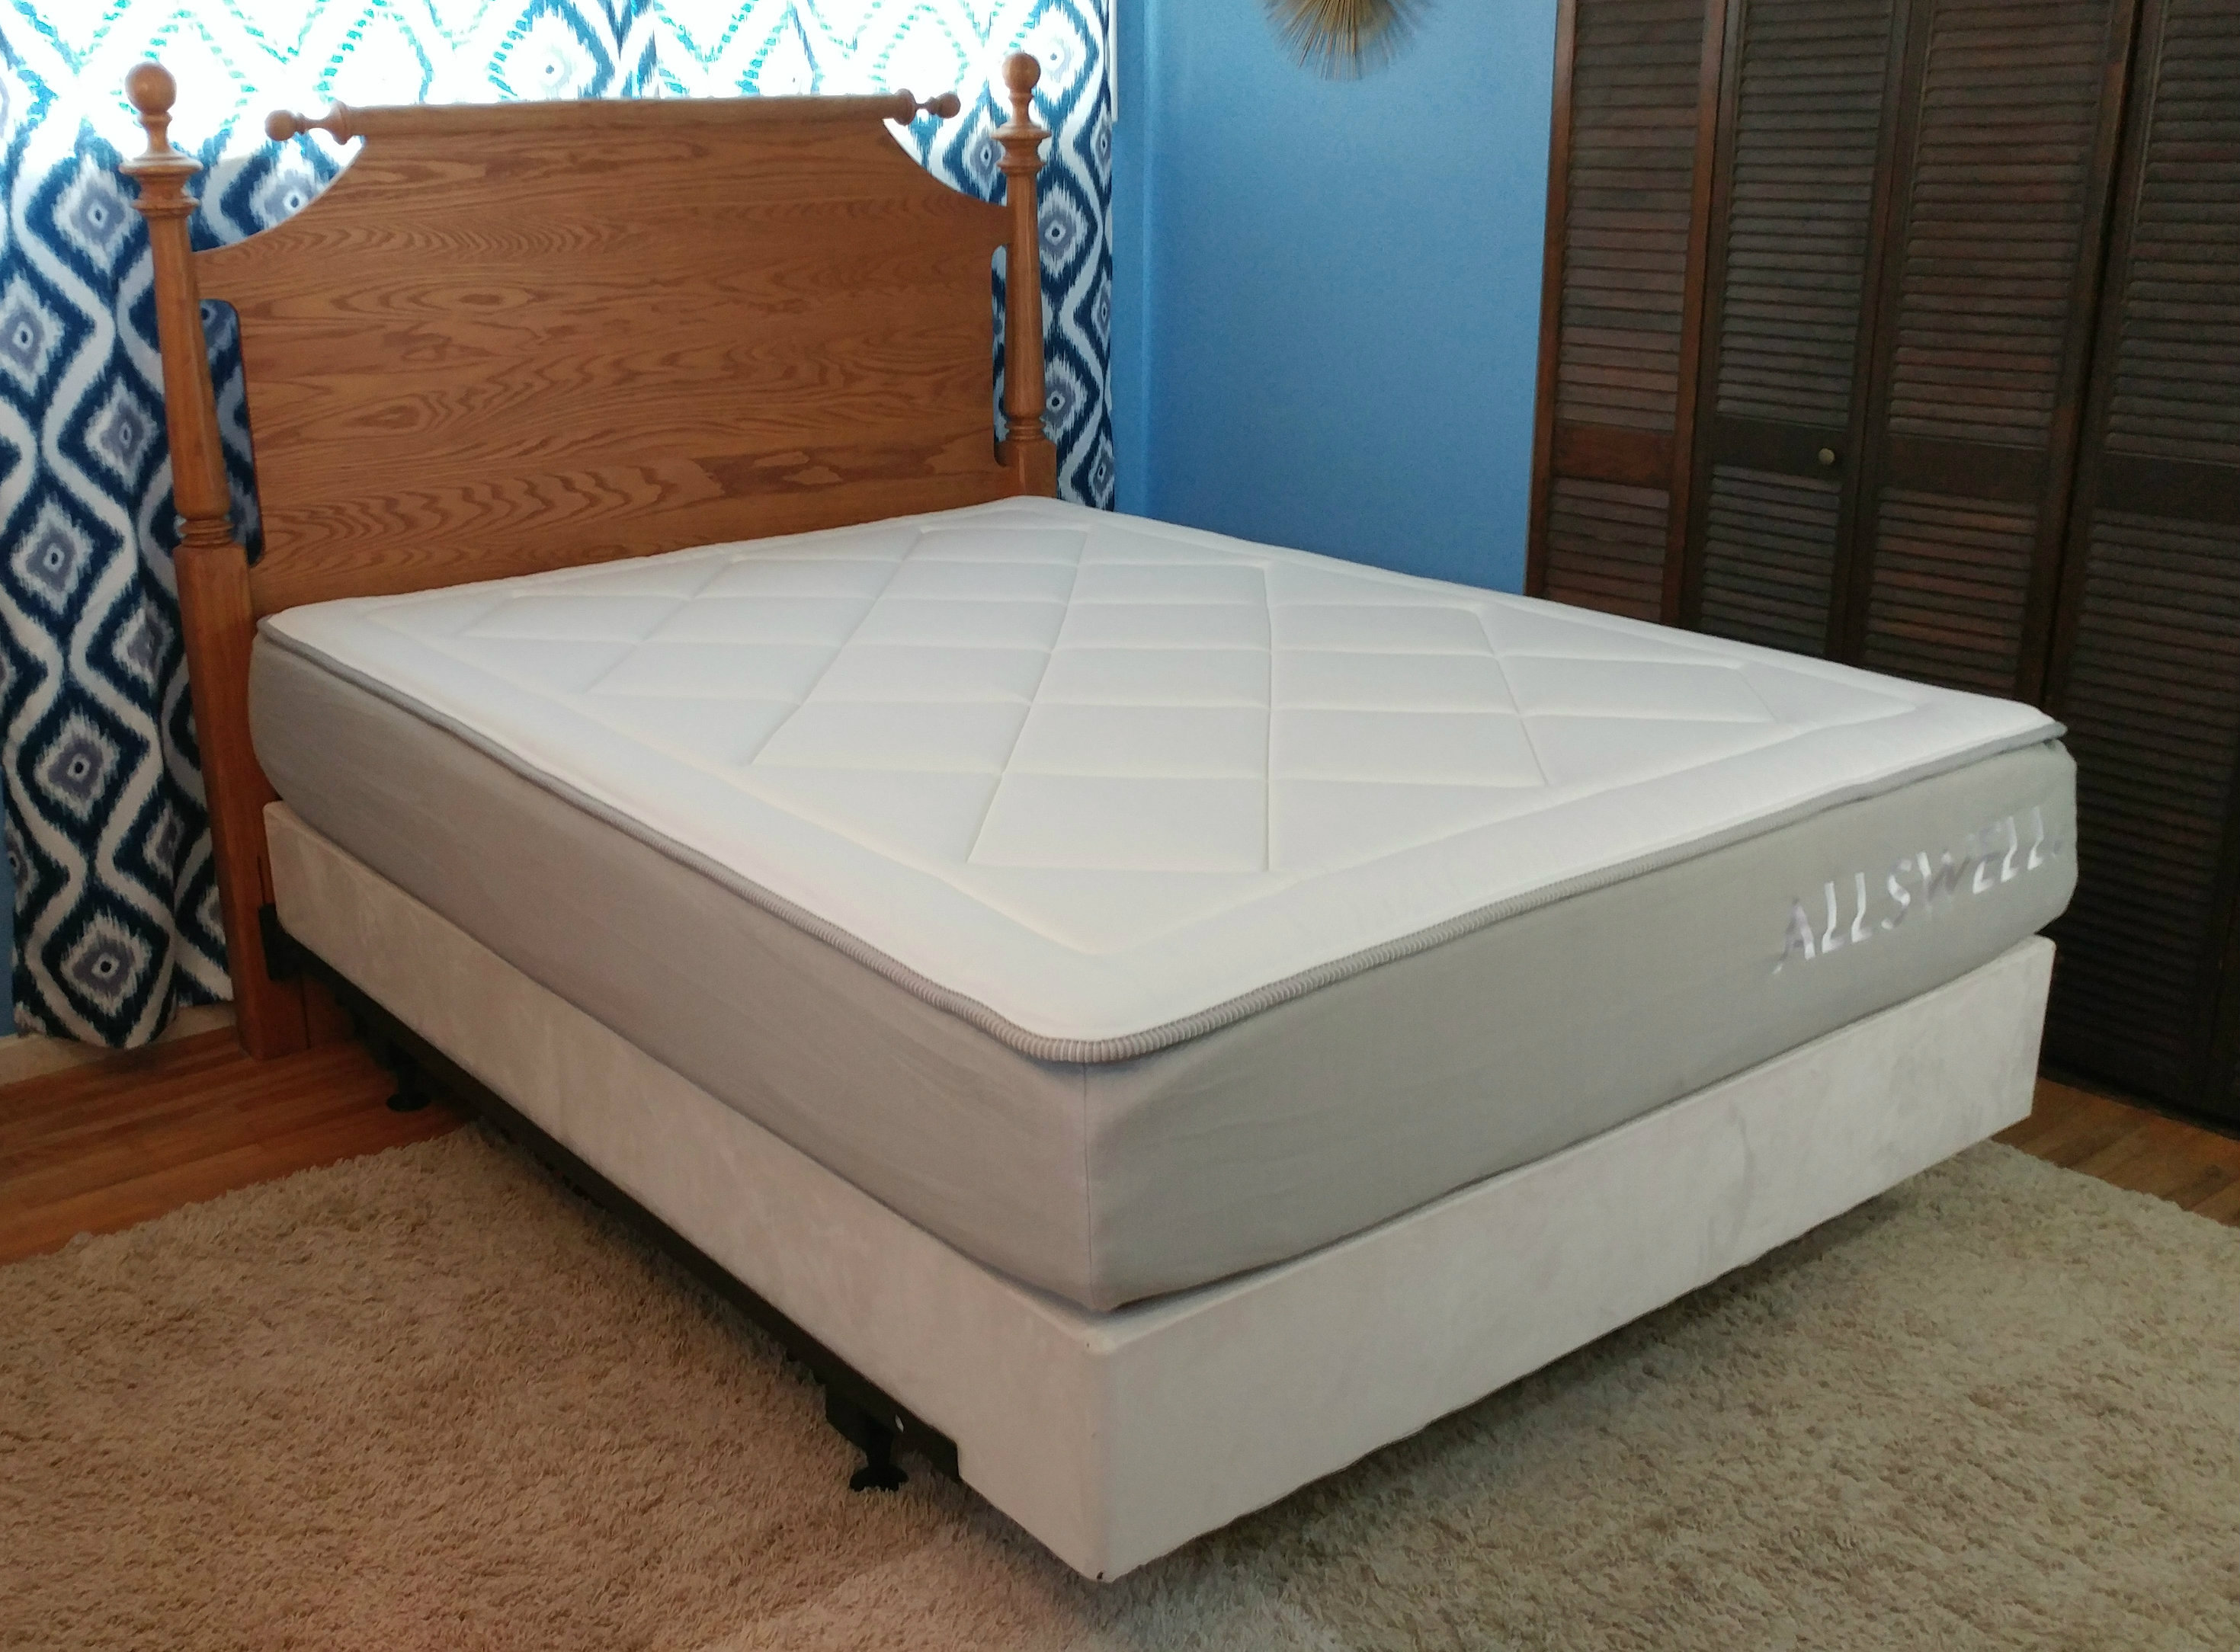 allswell home mattress reviews on yelp